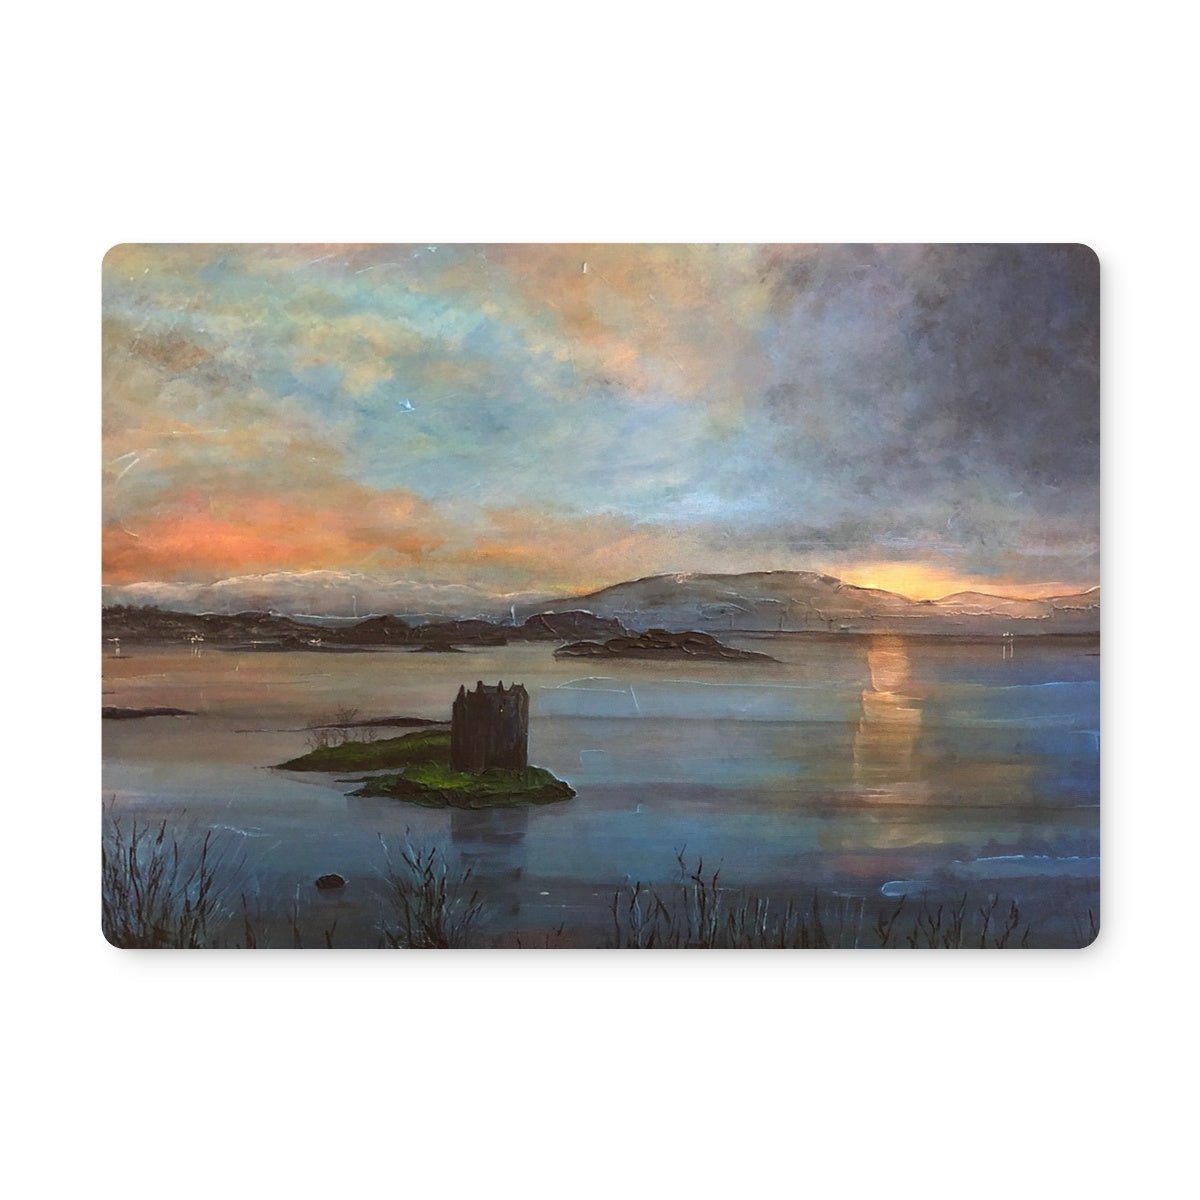 Castle Stalker Twilight Art Gifts Placemat-Placemats-Scottish Castles Art Gallery-Single Placemat-Paintings, Prints, Homeware, Art Gifts From Scotland By Scottish Artist Kevin Hunter